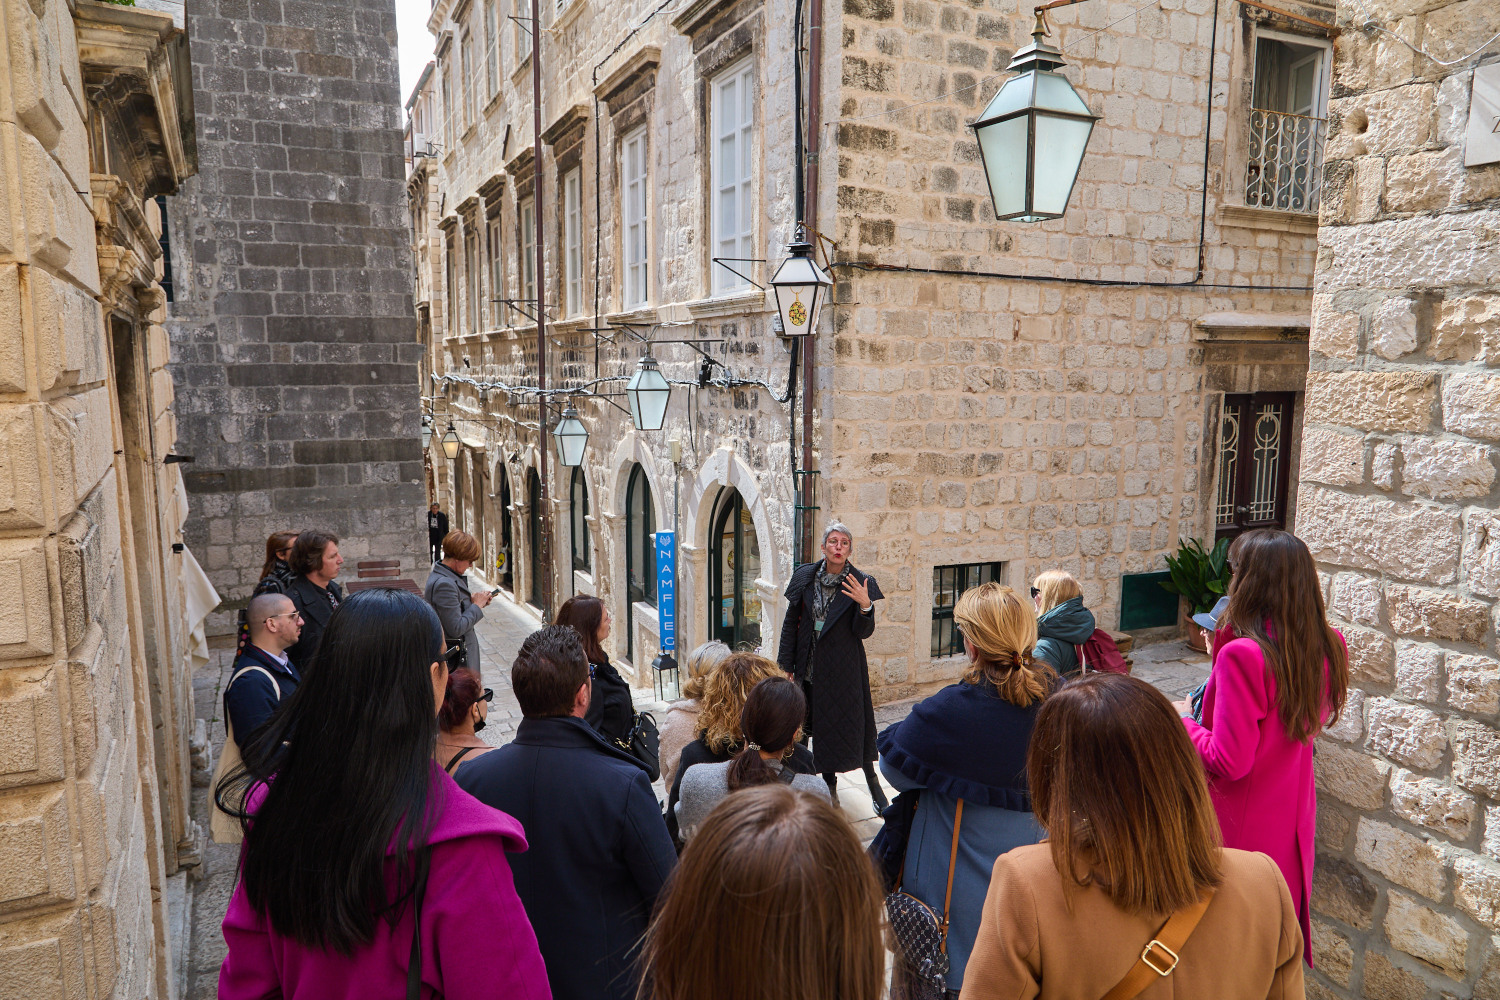 Also Dubrovnik development agency held its local event